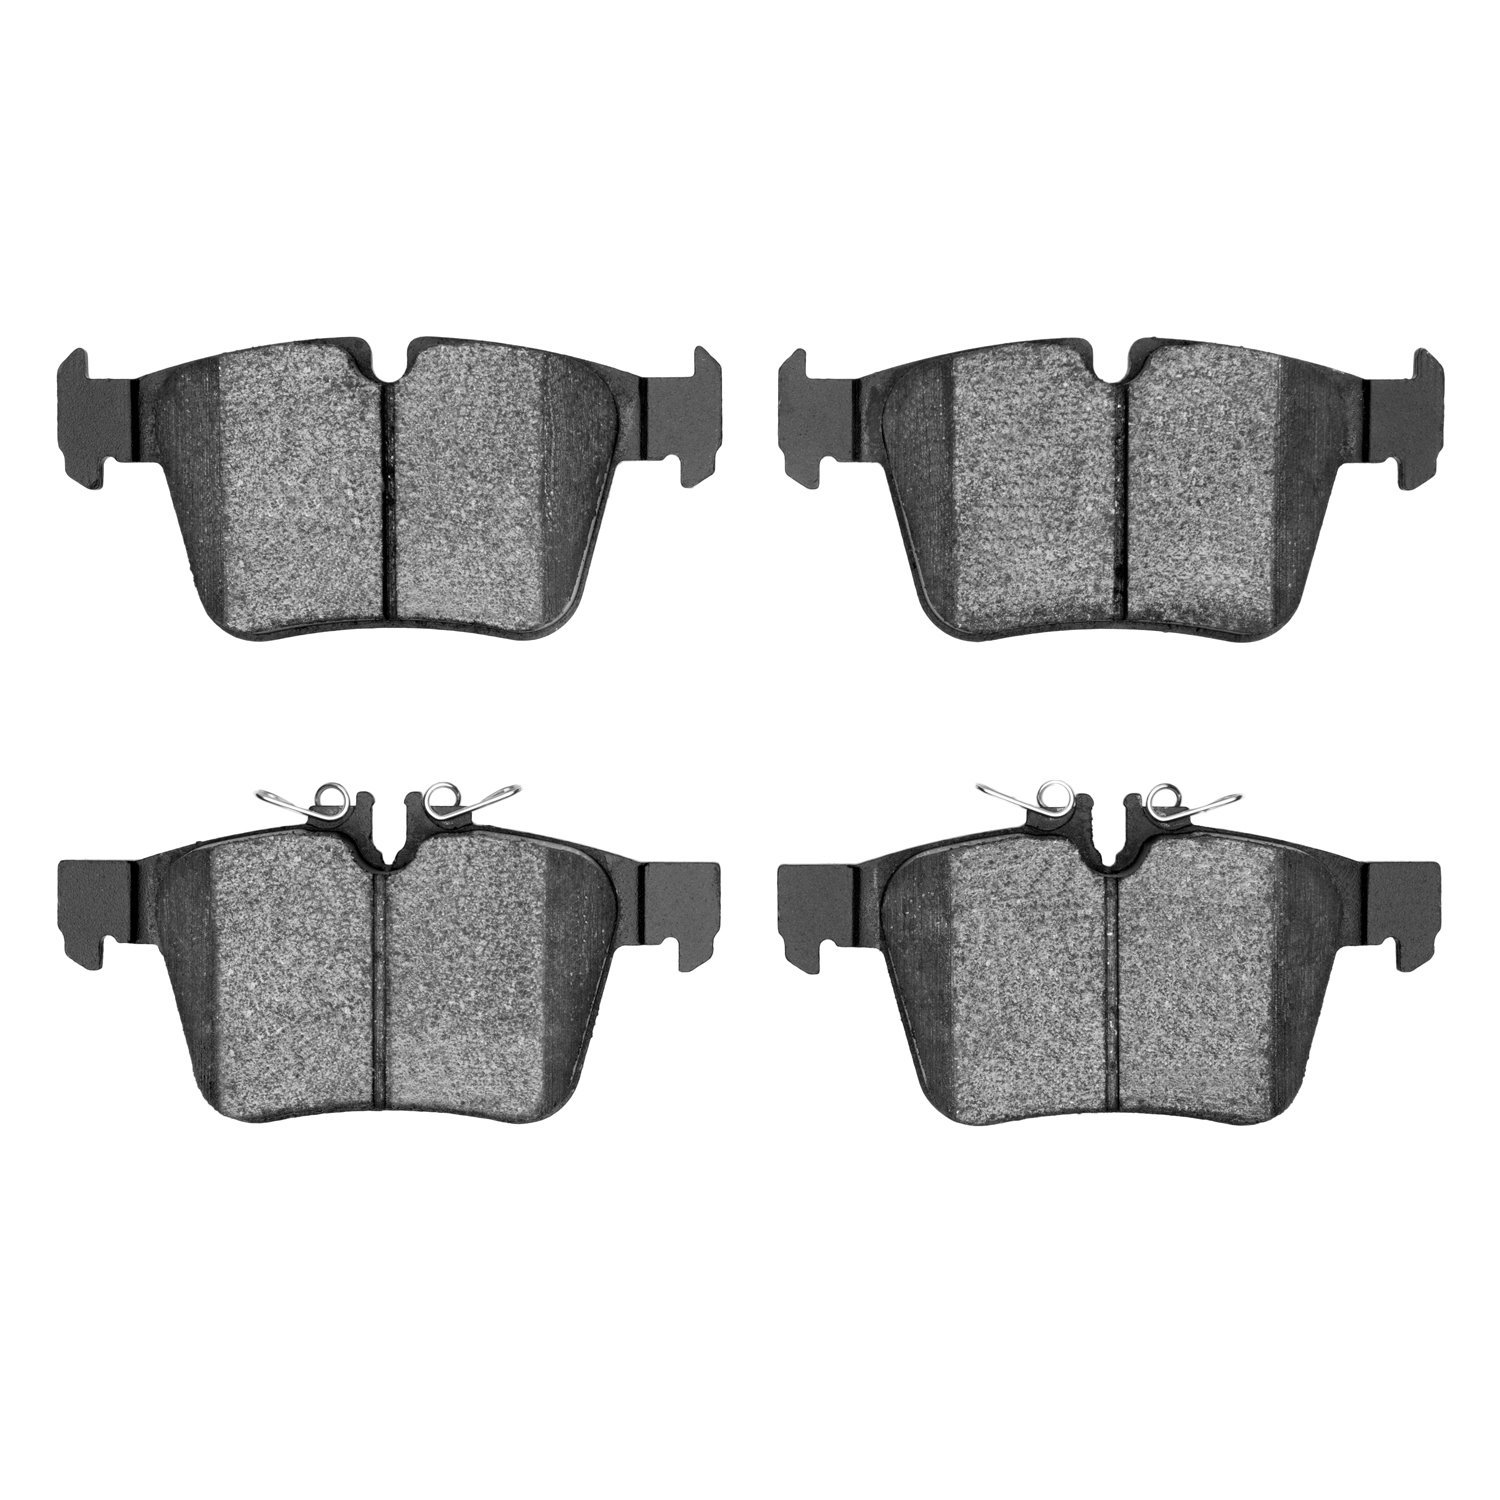 1115-1795-00 Active Performance Low-Metallic Brake Pads, Fits Select Mercedes-Benz, Position: Rear